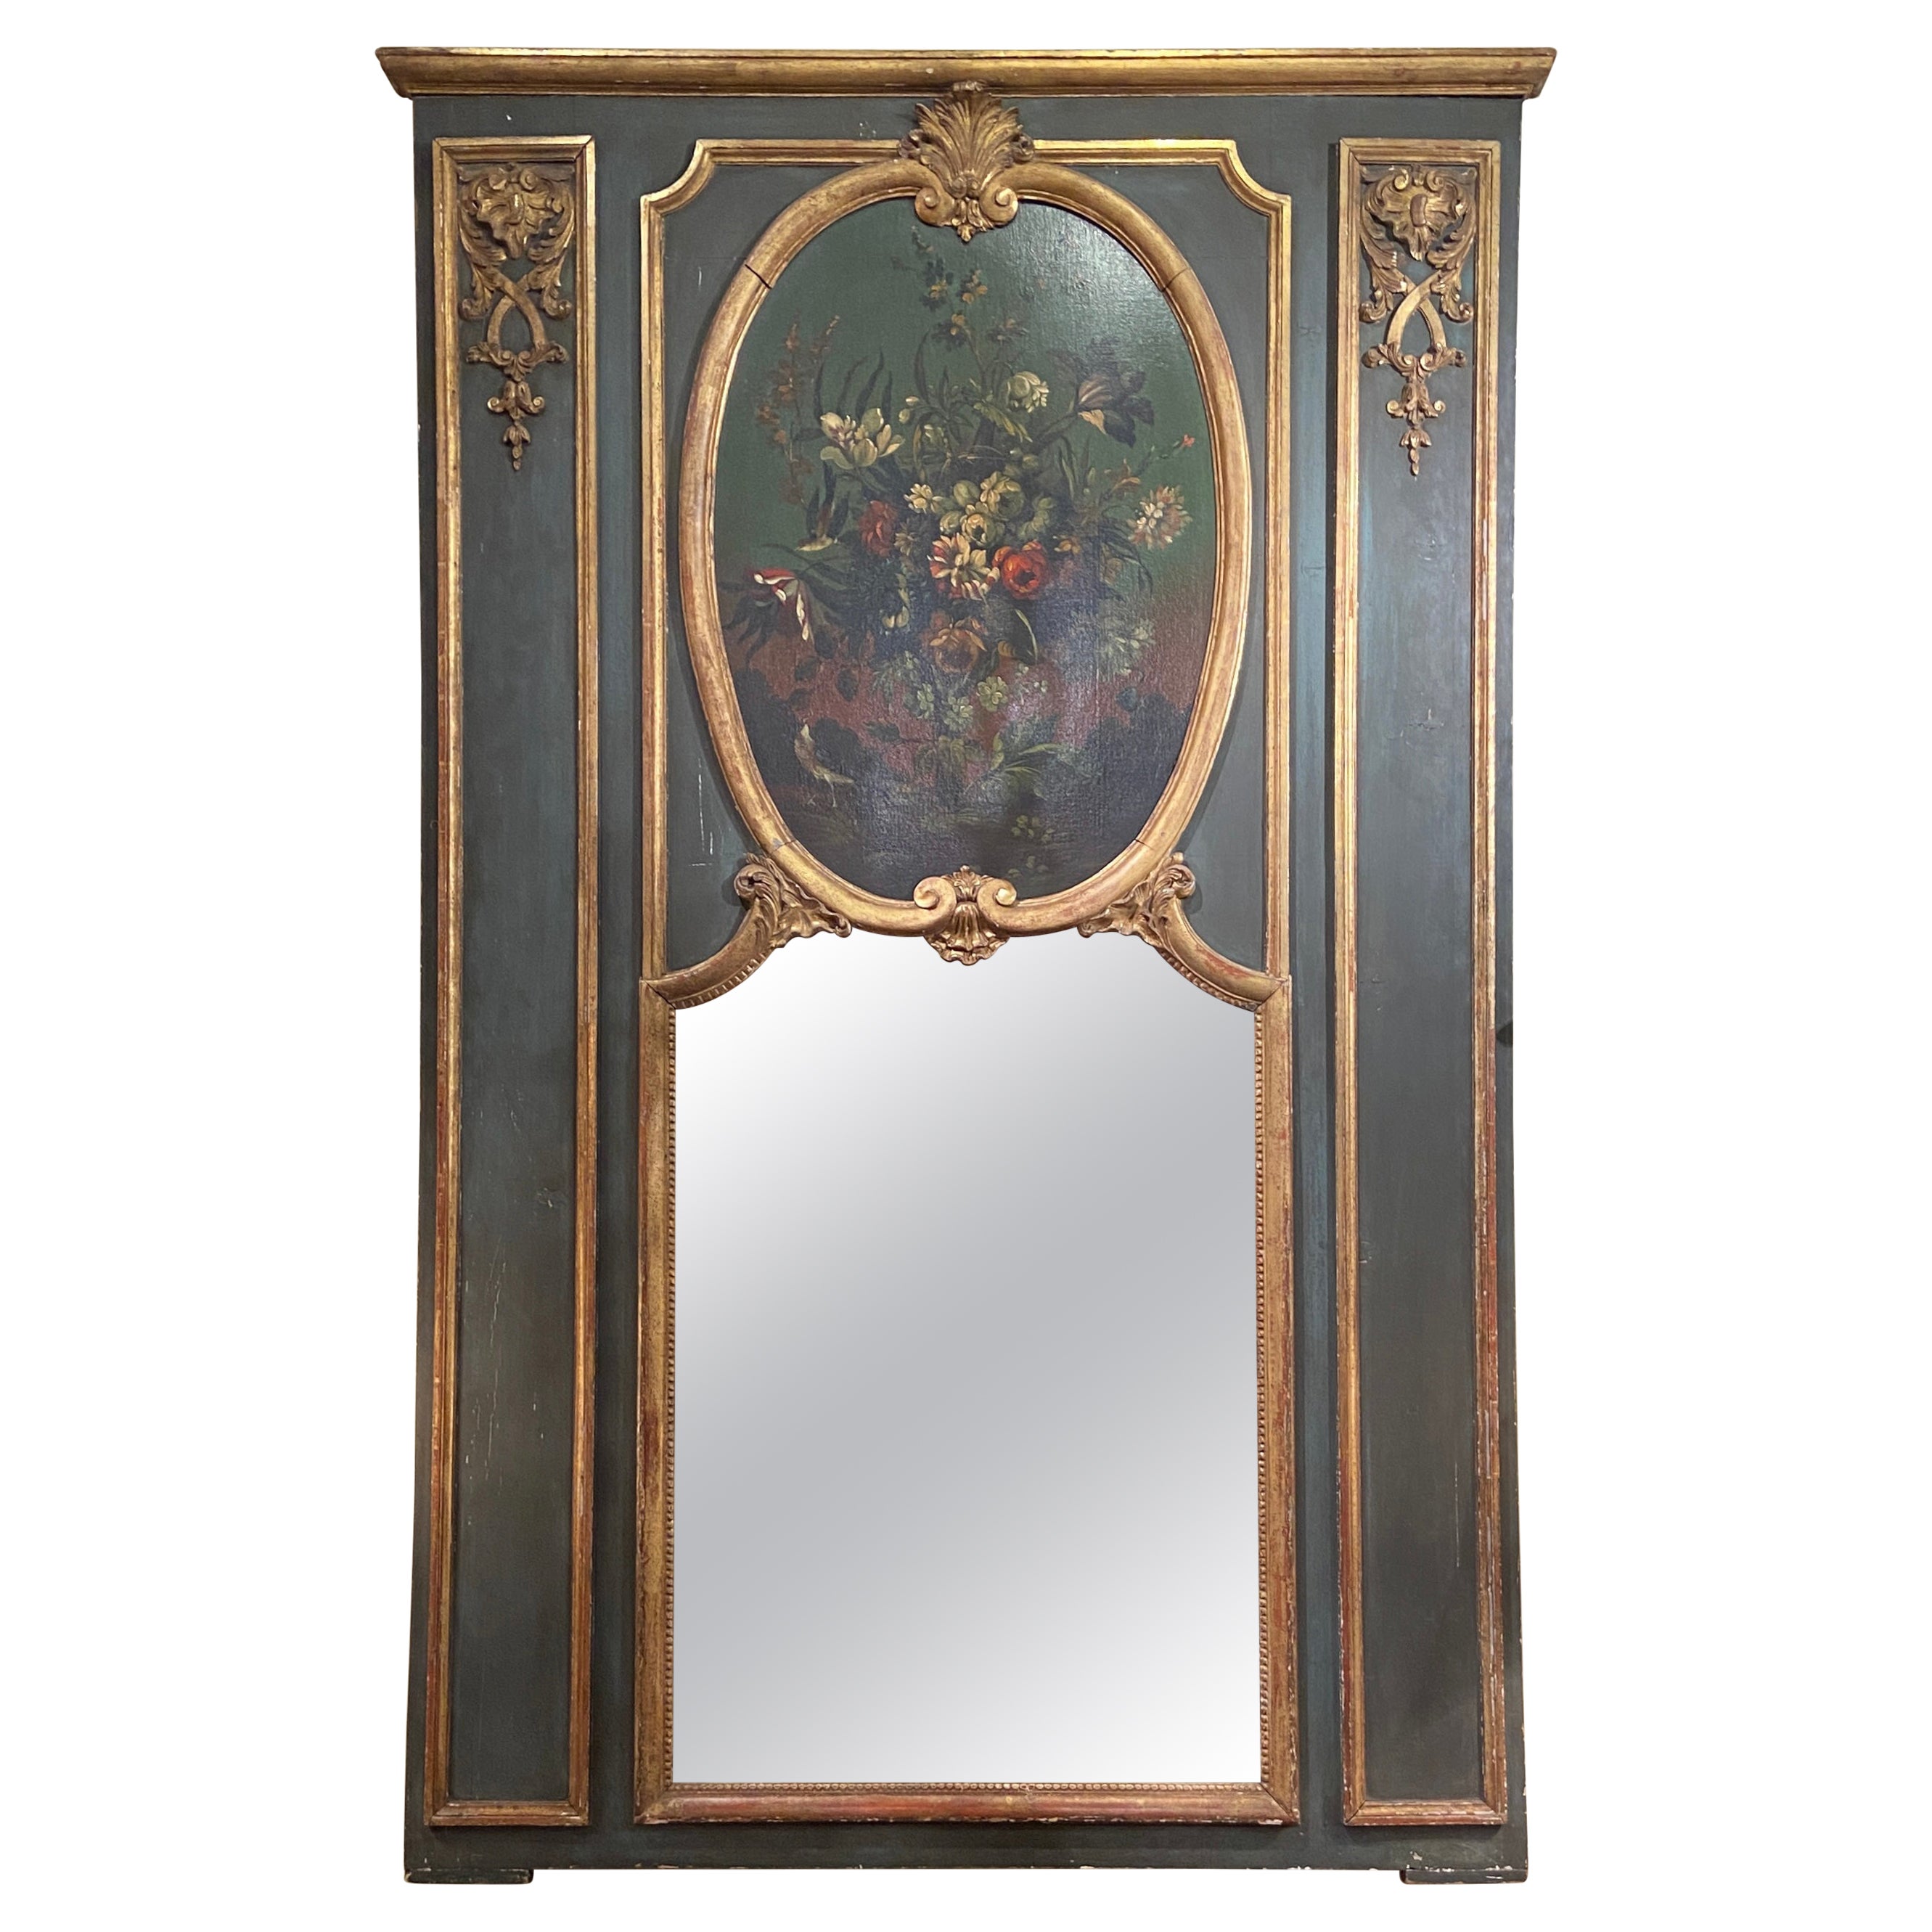 Antique French Carved and Gilt Wood Trumeau Mirror with Painting Circa 1890-1910